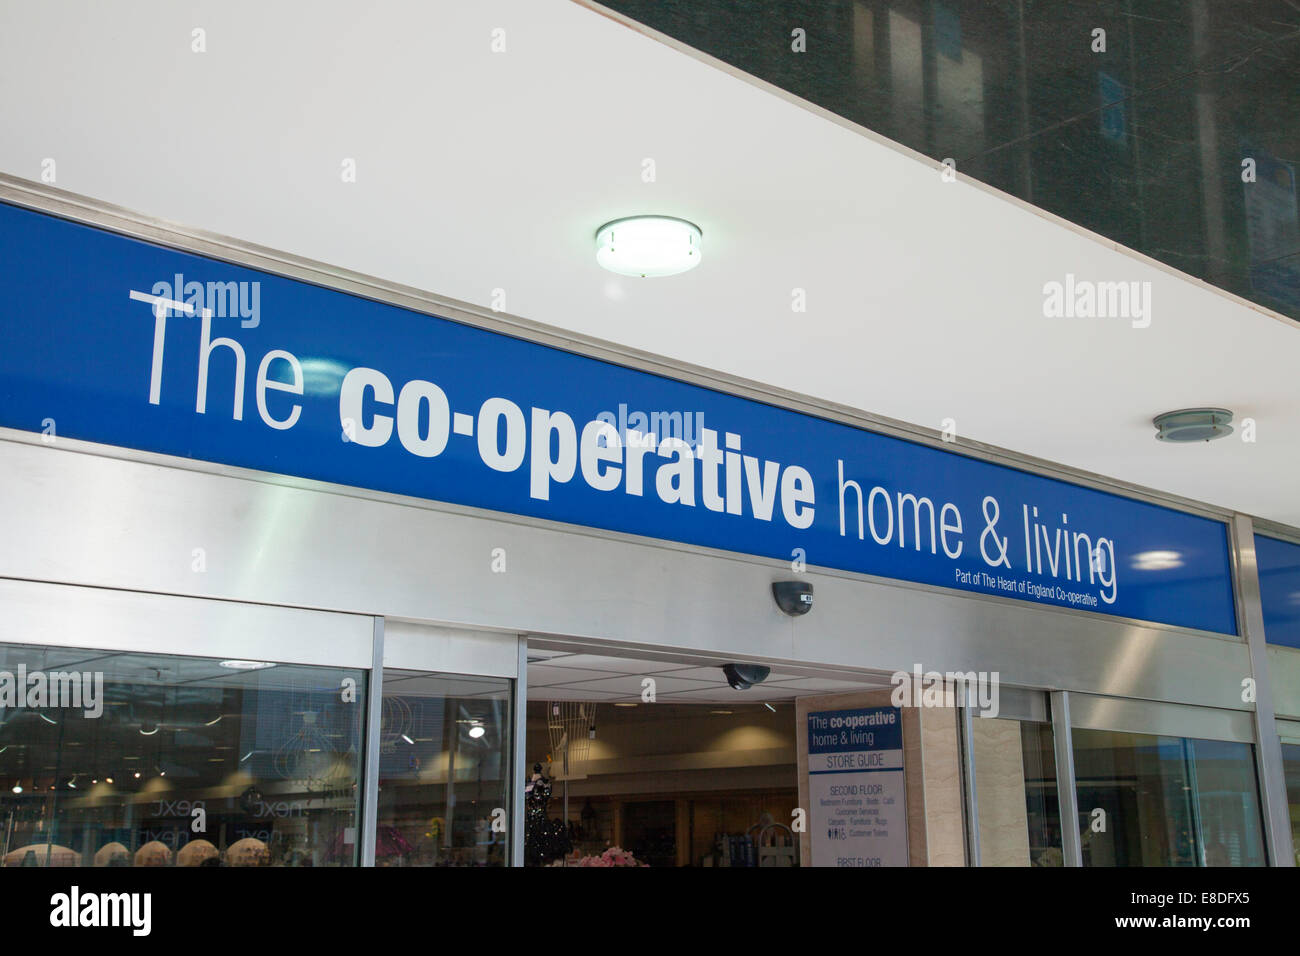 A Co-operative home & living high street branch, England, UK Stock Photo